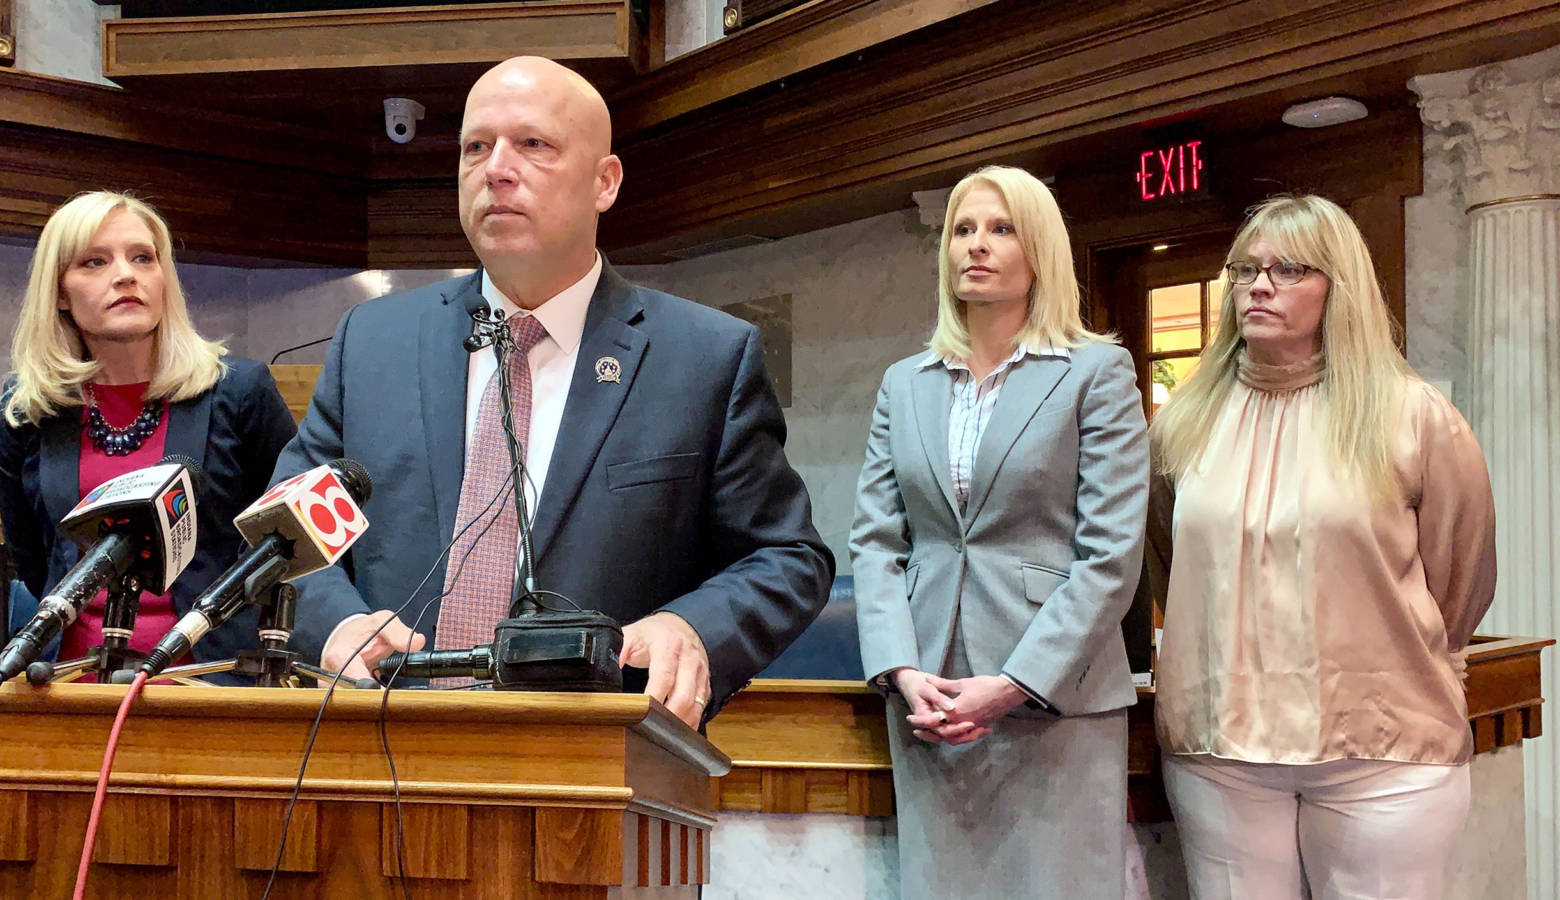 Sen. Mike Crider (R-Greenfield) talks about his legislation with Sen. Erin Houchin (R-Salem), left, and sexual assault prevention advocates supporting him. (Brandon Smith/IPB News)